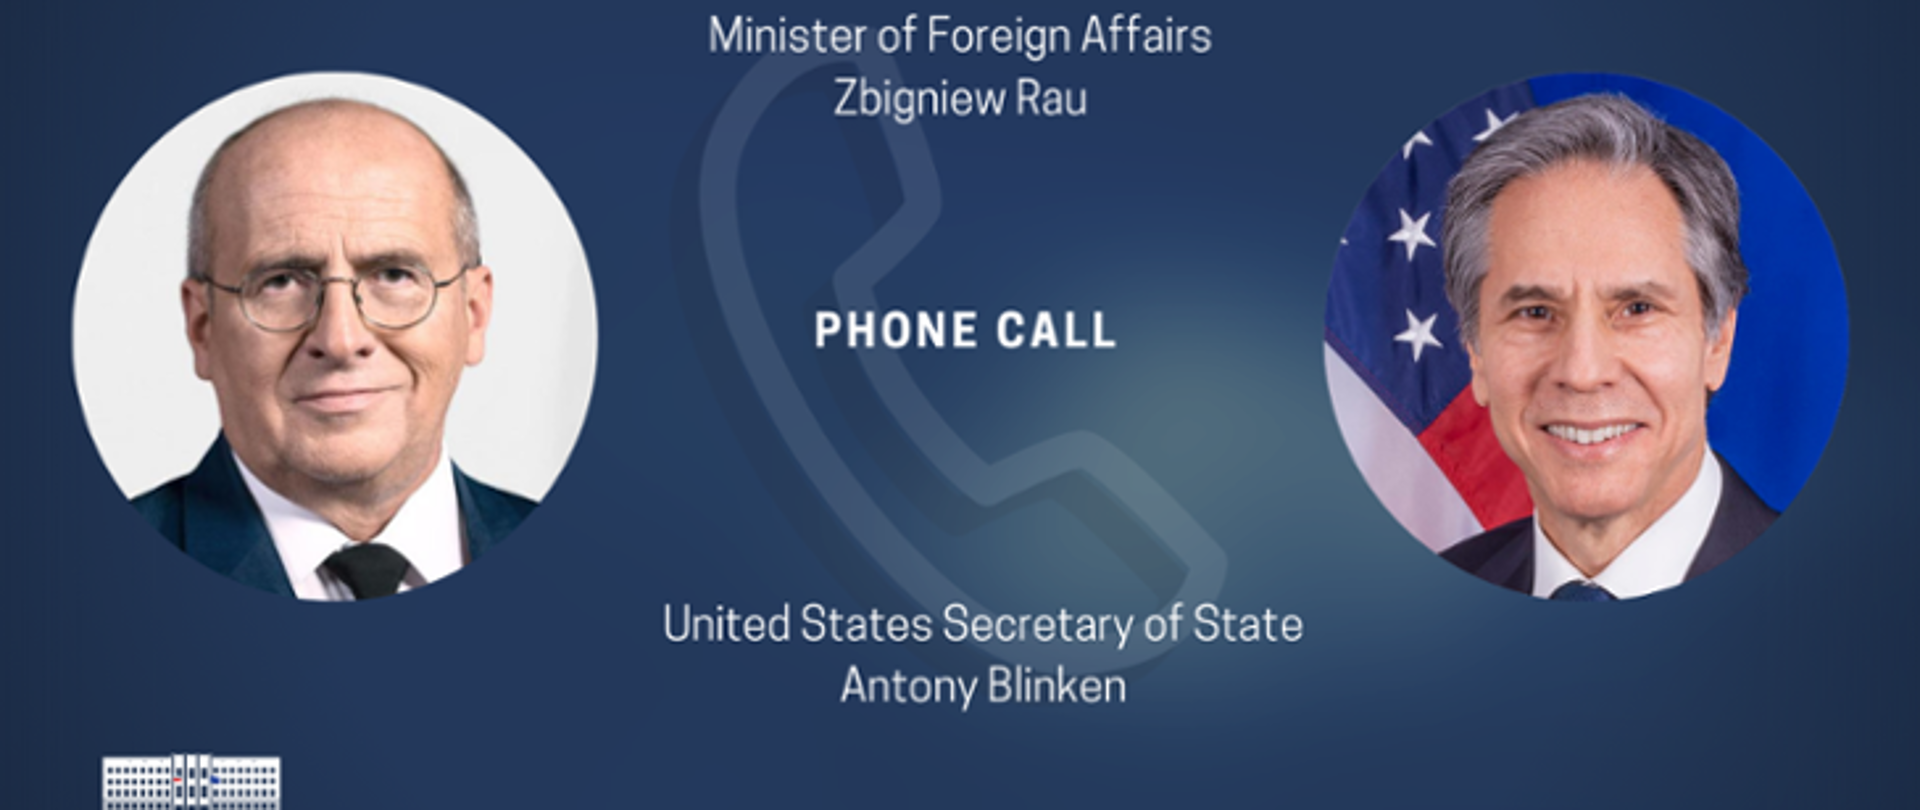 Phone call between Minister Z. Rau and US Secretary of State A. Blinken_13.04.2021